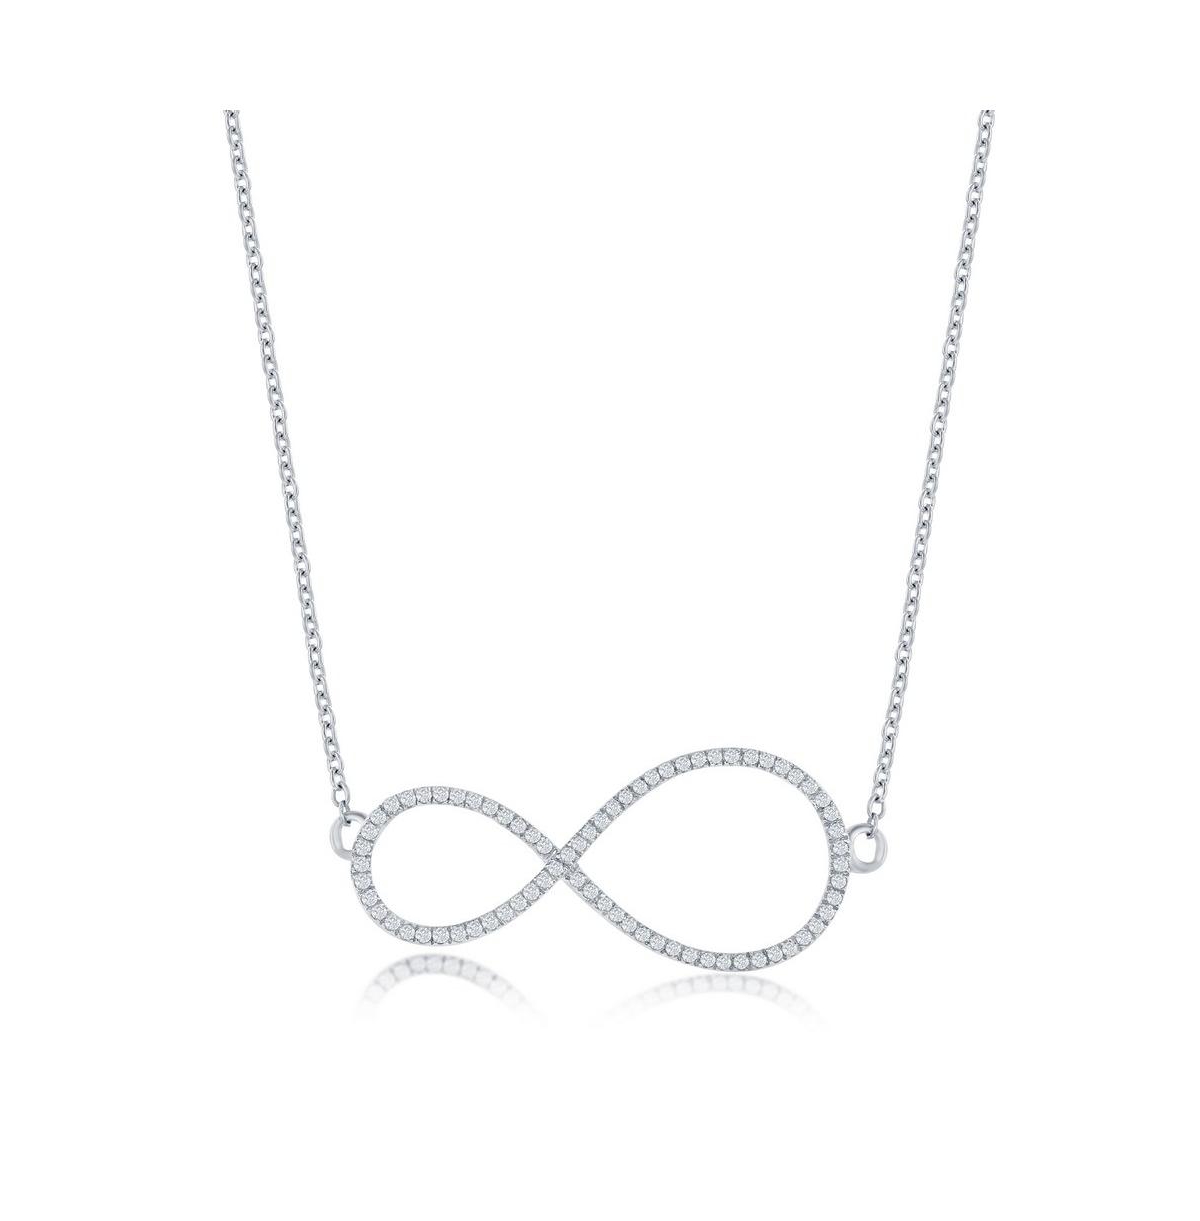 SIMONA DIAMOND INFINITY PENDANT NECKLACE (1/4 CT. T.W.) - 73 STONES IN STERLING SILVER